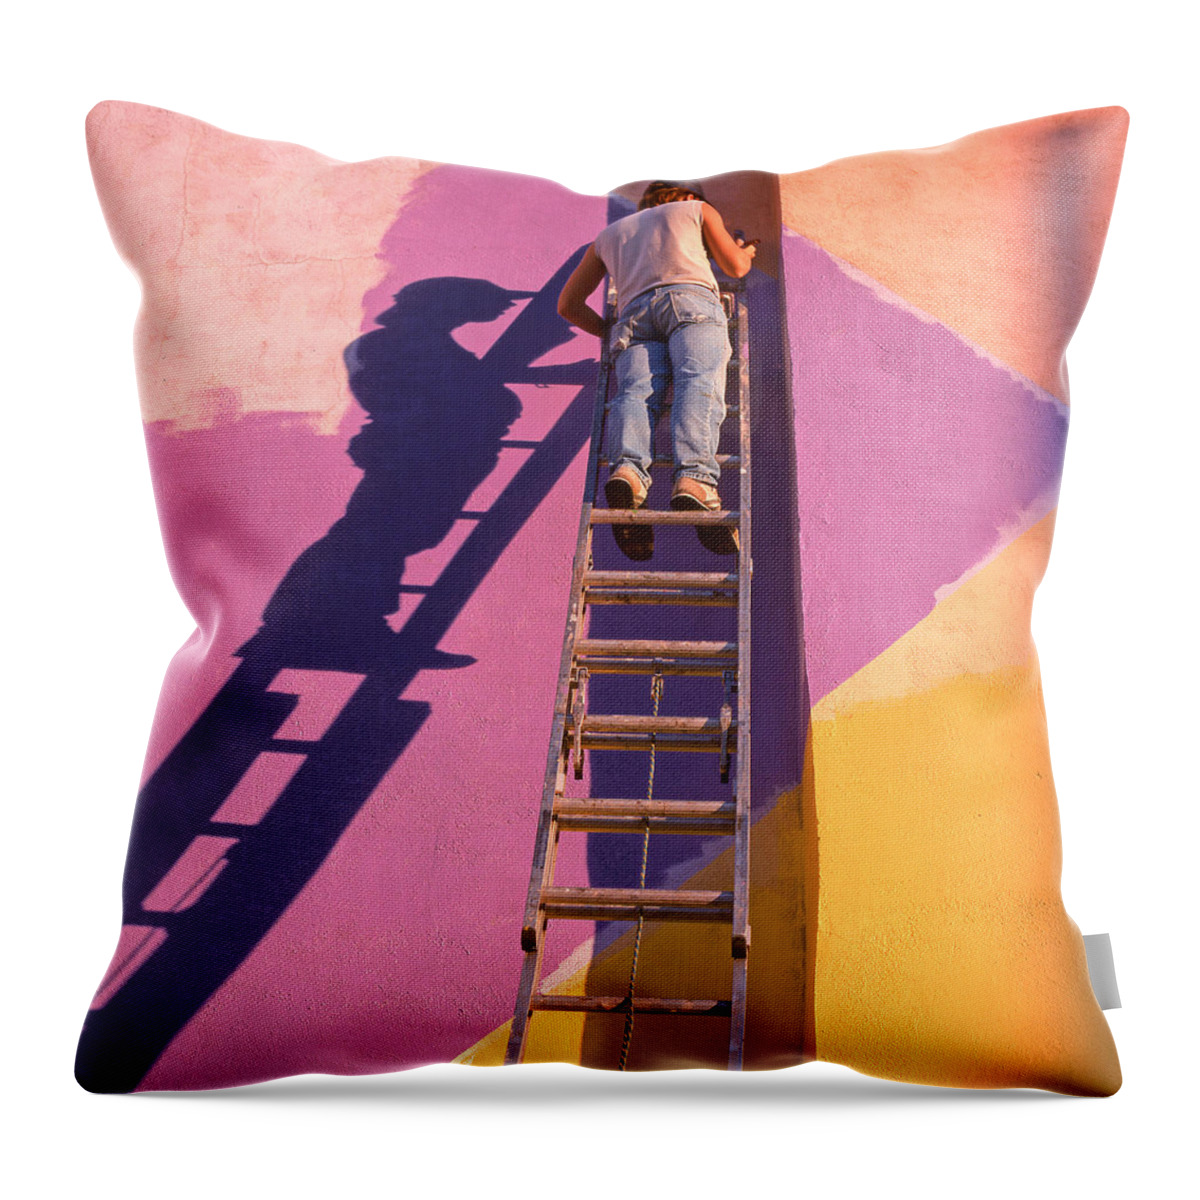 Painter Throw Pillow featuring the photograph The Painter by Don Spenner